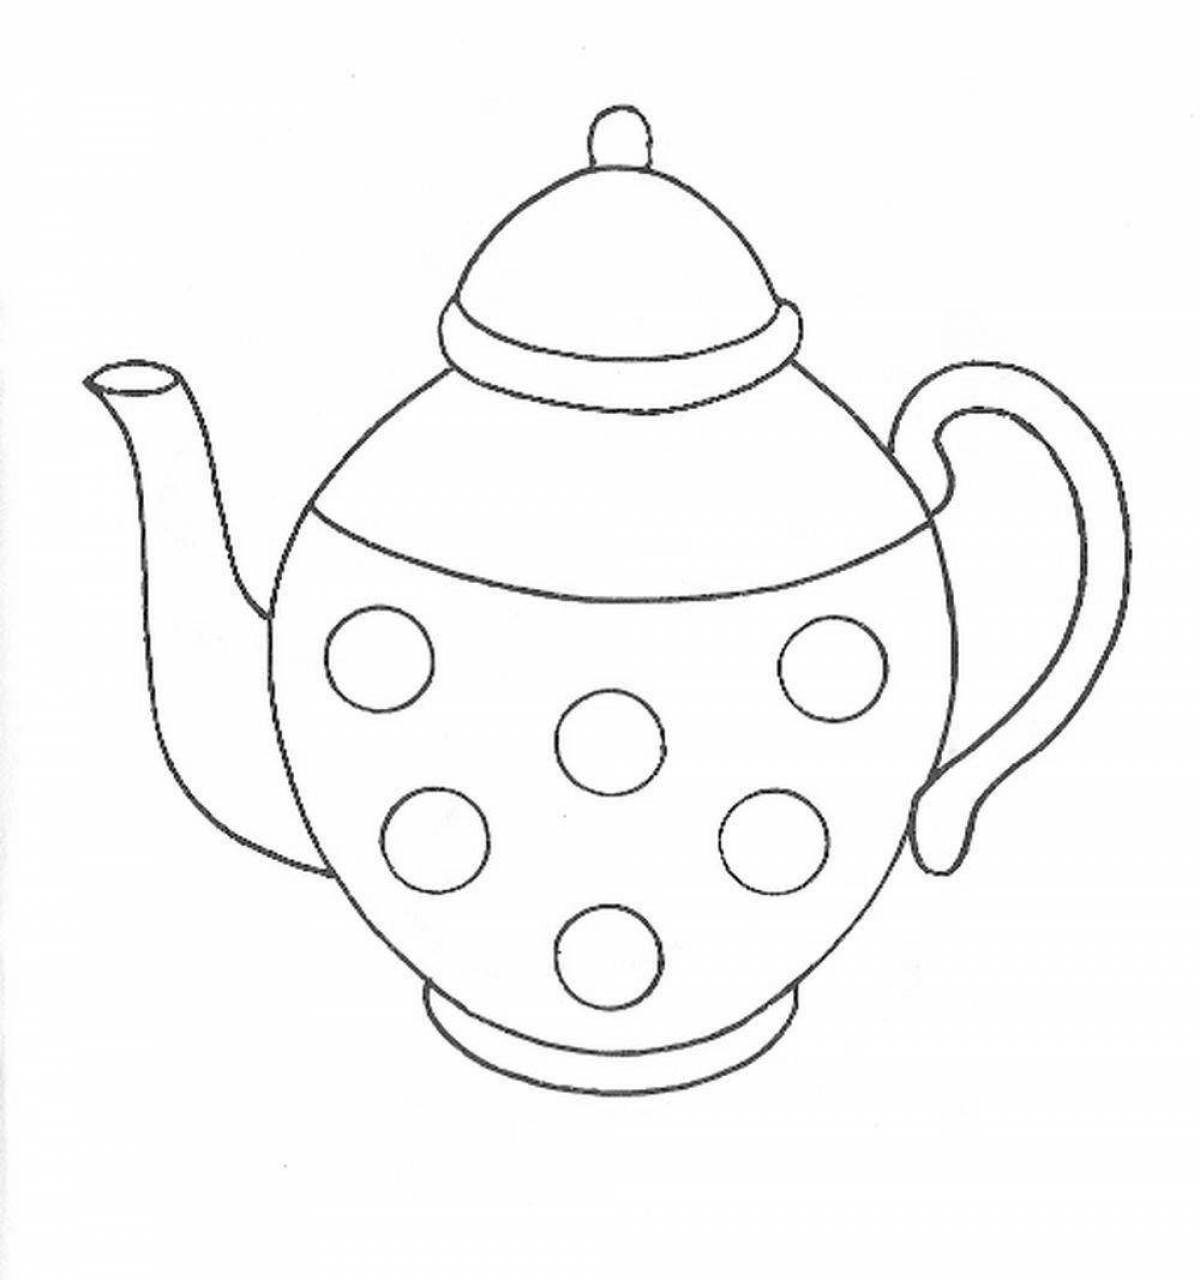 Cheerful teapot coloring for kids